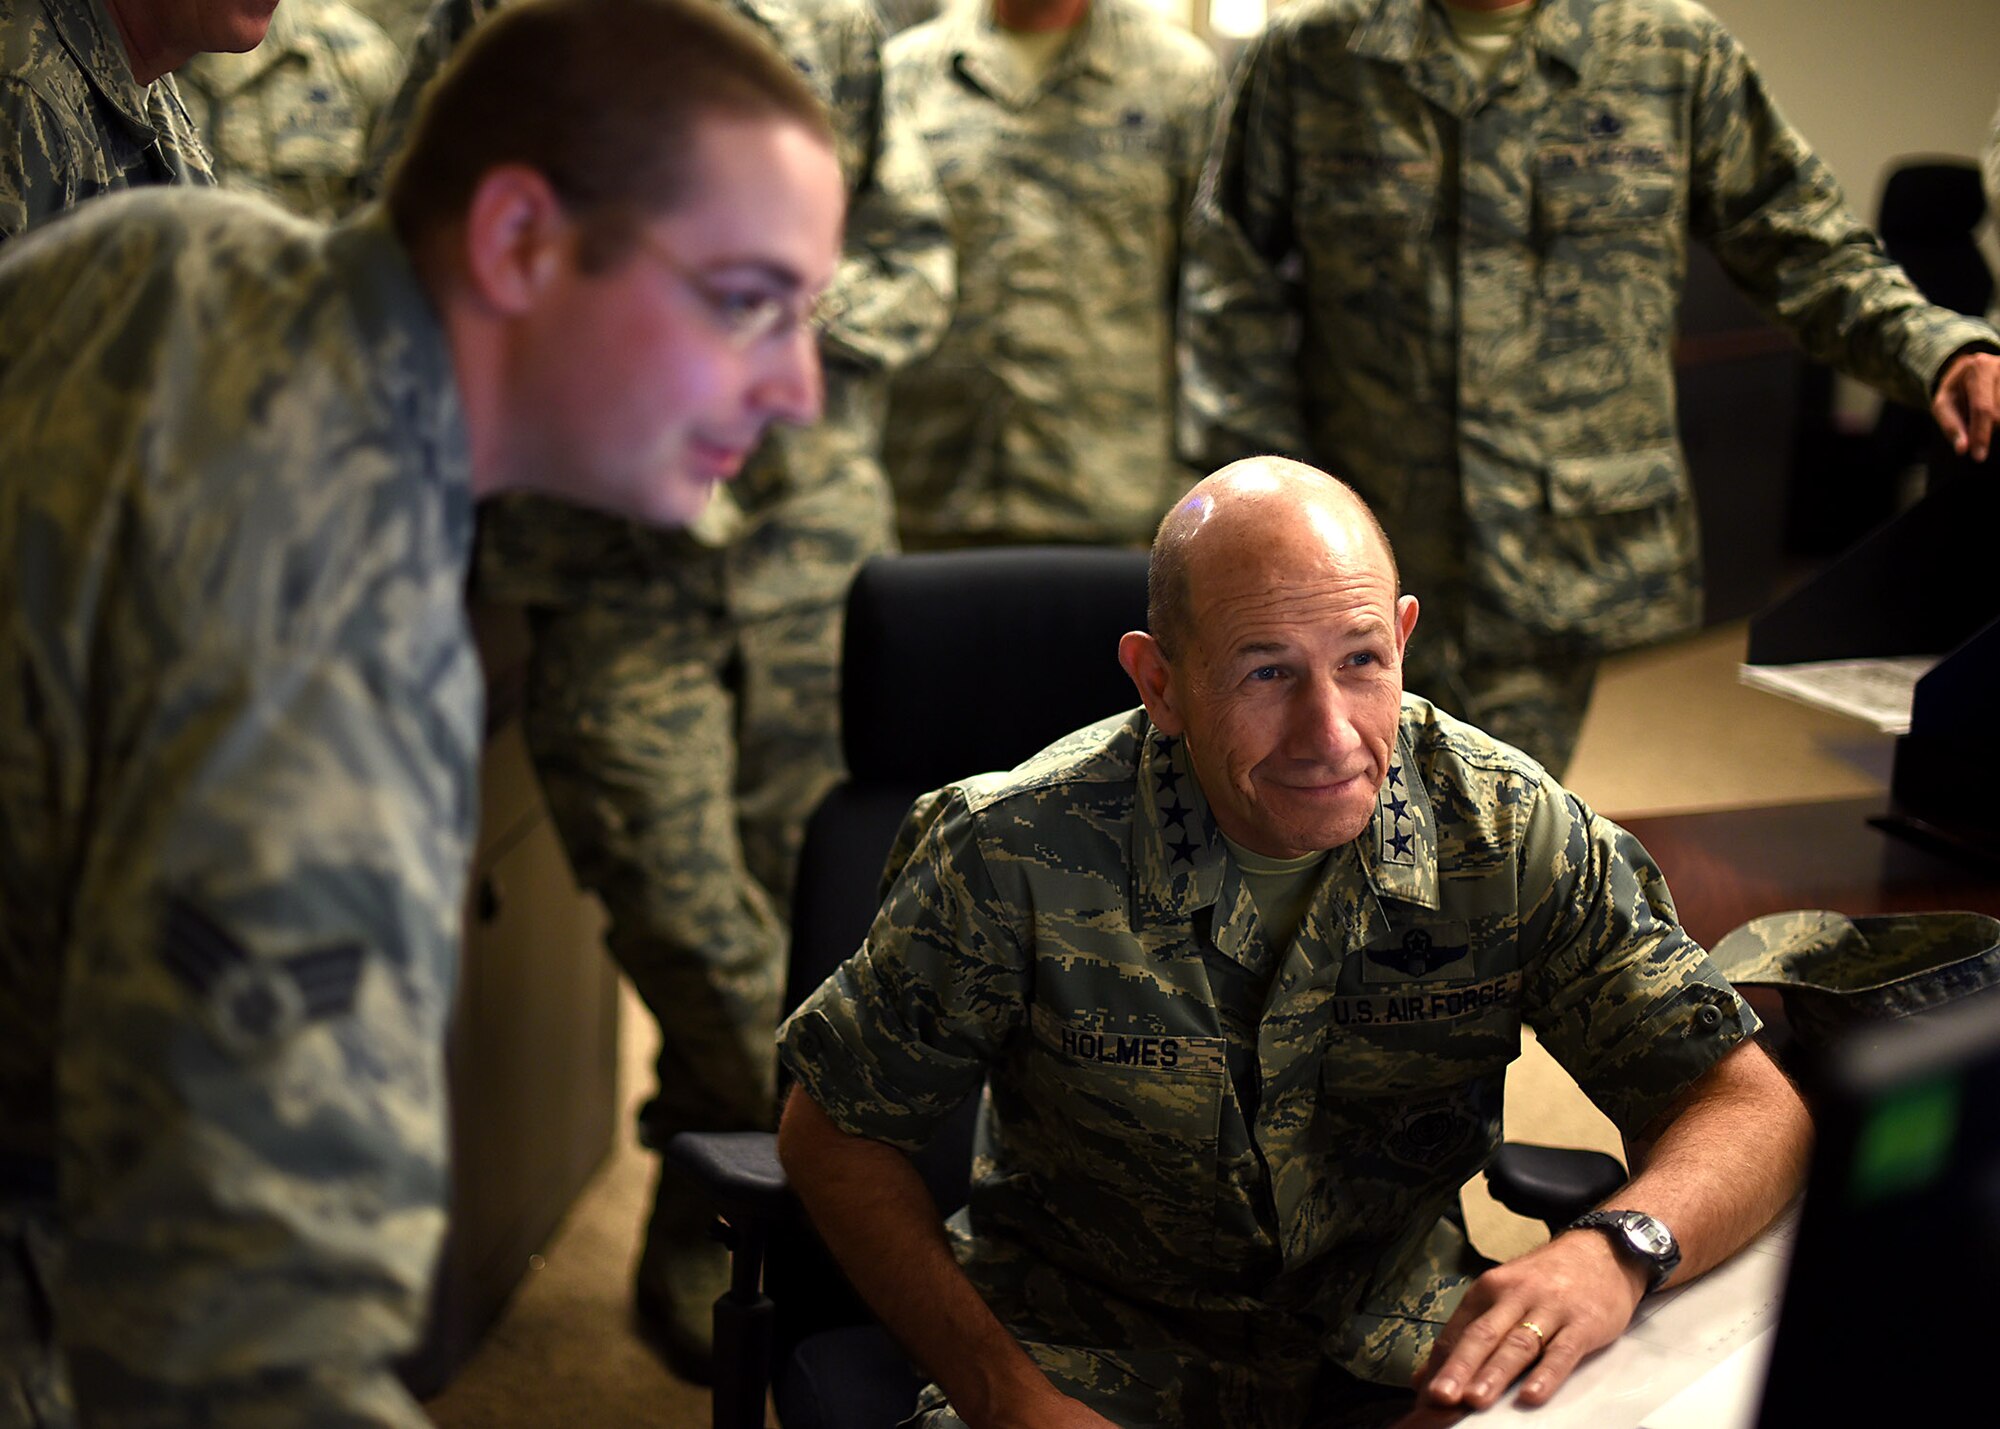 Gen. Mike Holmes, Air Combat Command commander, right, looks on as Senior Airman Nicholas Anthony, 319th Communications Squadron High Frequency Global Communication System radio operator, explains the capabilities of the HFGCS, June 15, 2017, on Grand Forks AFB, N.D. The HFGCS mission is a new asset to ACC and Holmes was able to get a look at how it works. (U.S. Air Force photo by Senior Airman Ryan Sparks)